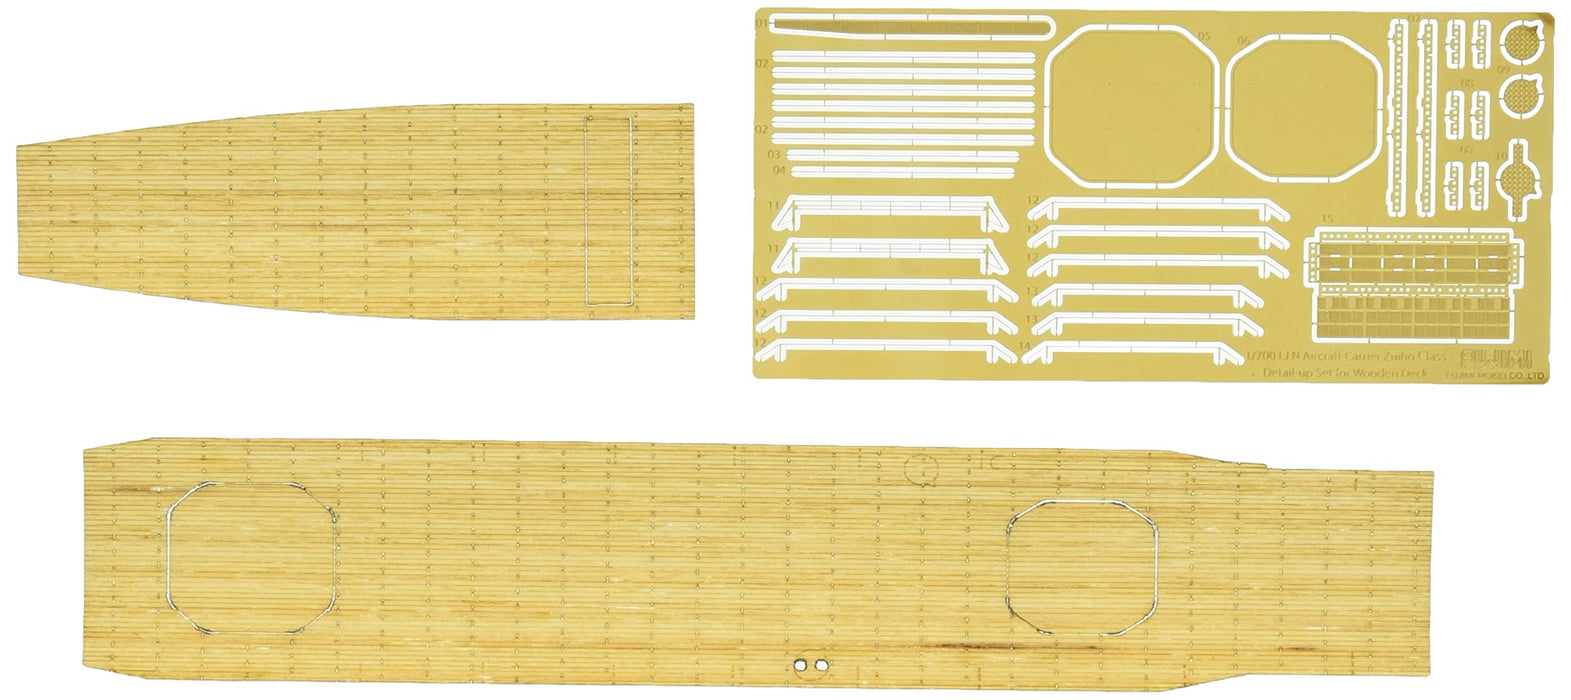 FUJIMI 1/700 Gup107 Wooden Deck Seal Ijn Aircraftcarrier Zuiho 1944 1/700 Scale